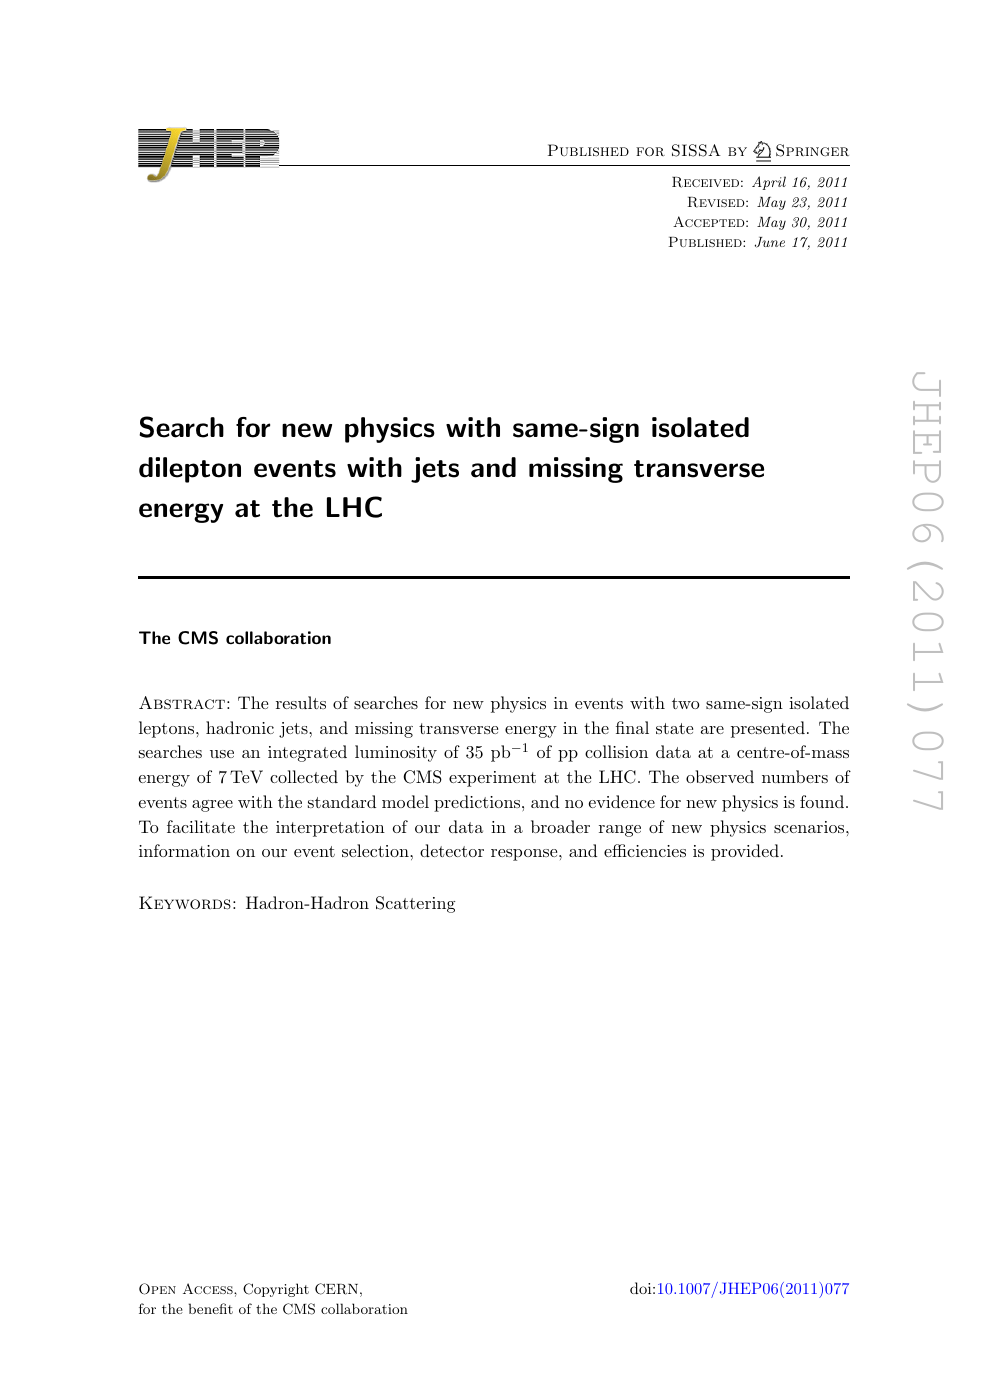 Search For New Physics With Same Sign Isolated Dilepton Events With Jets And Missing Transverse Energy At The Lhc Topic Of Research Paper In Physical Sciences Download Scholarly Article Pdf And Read